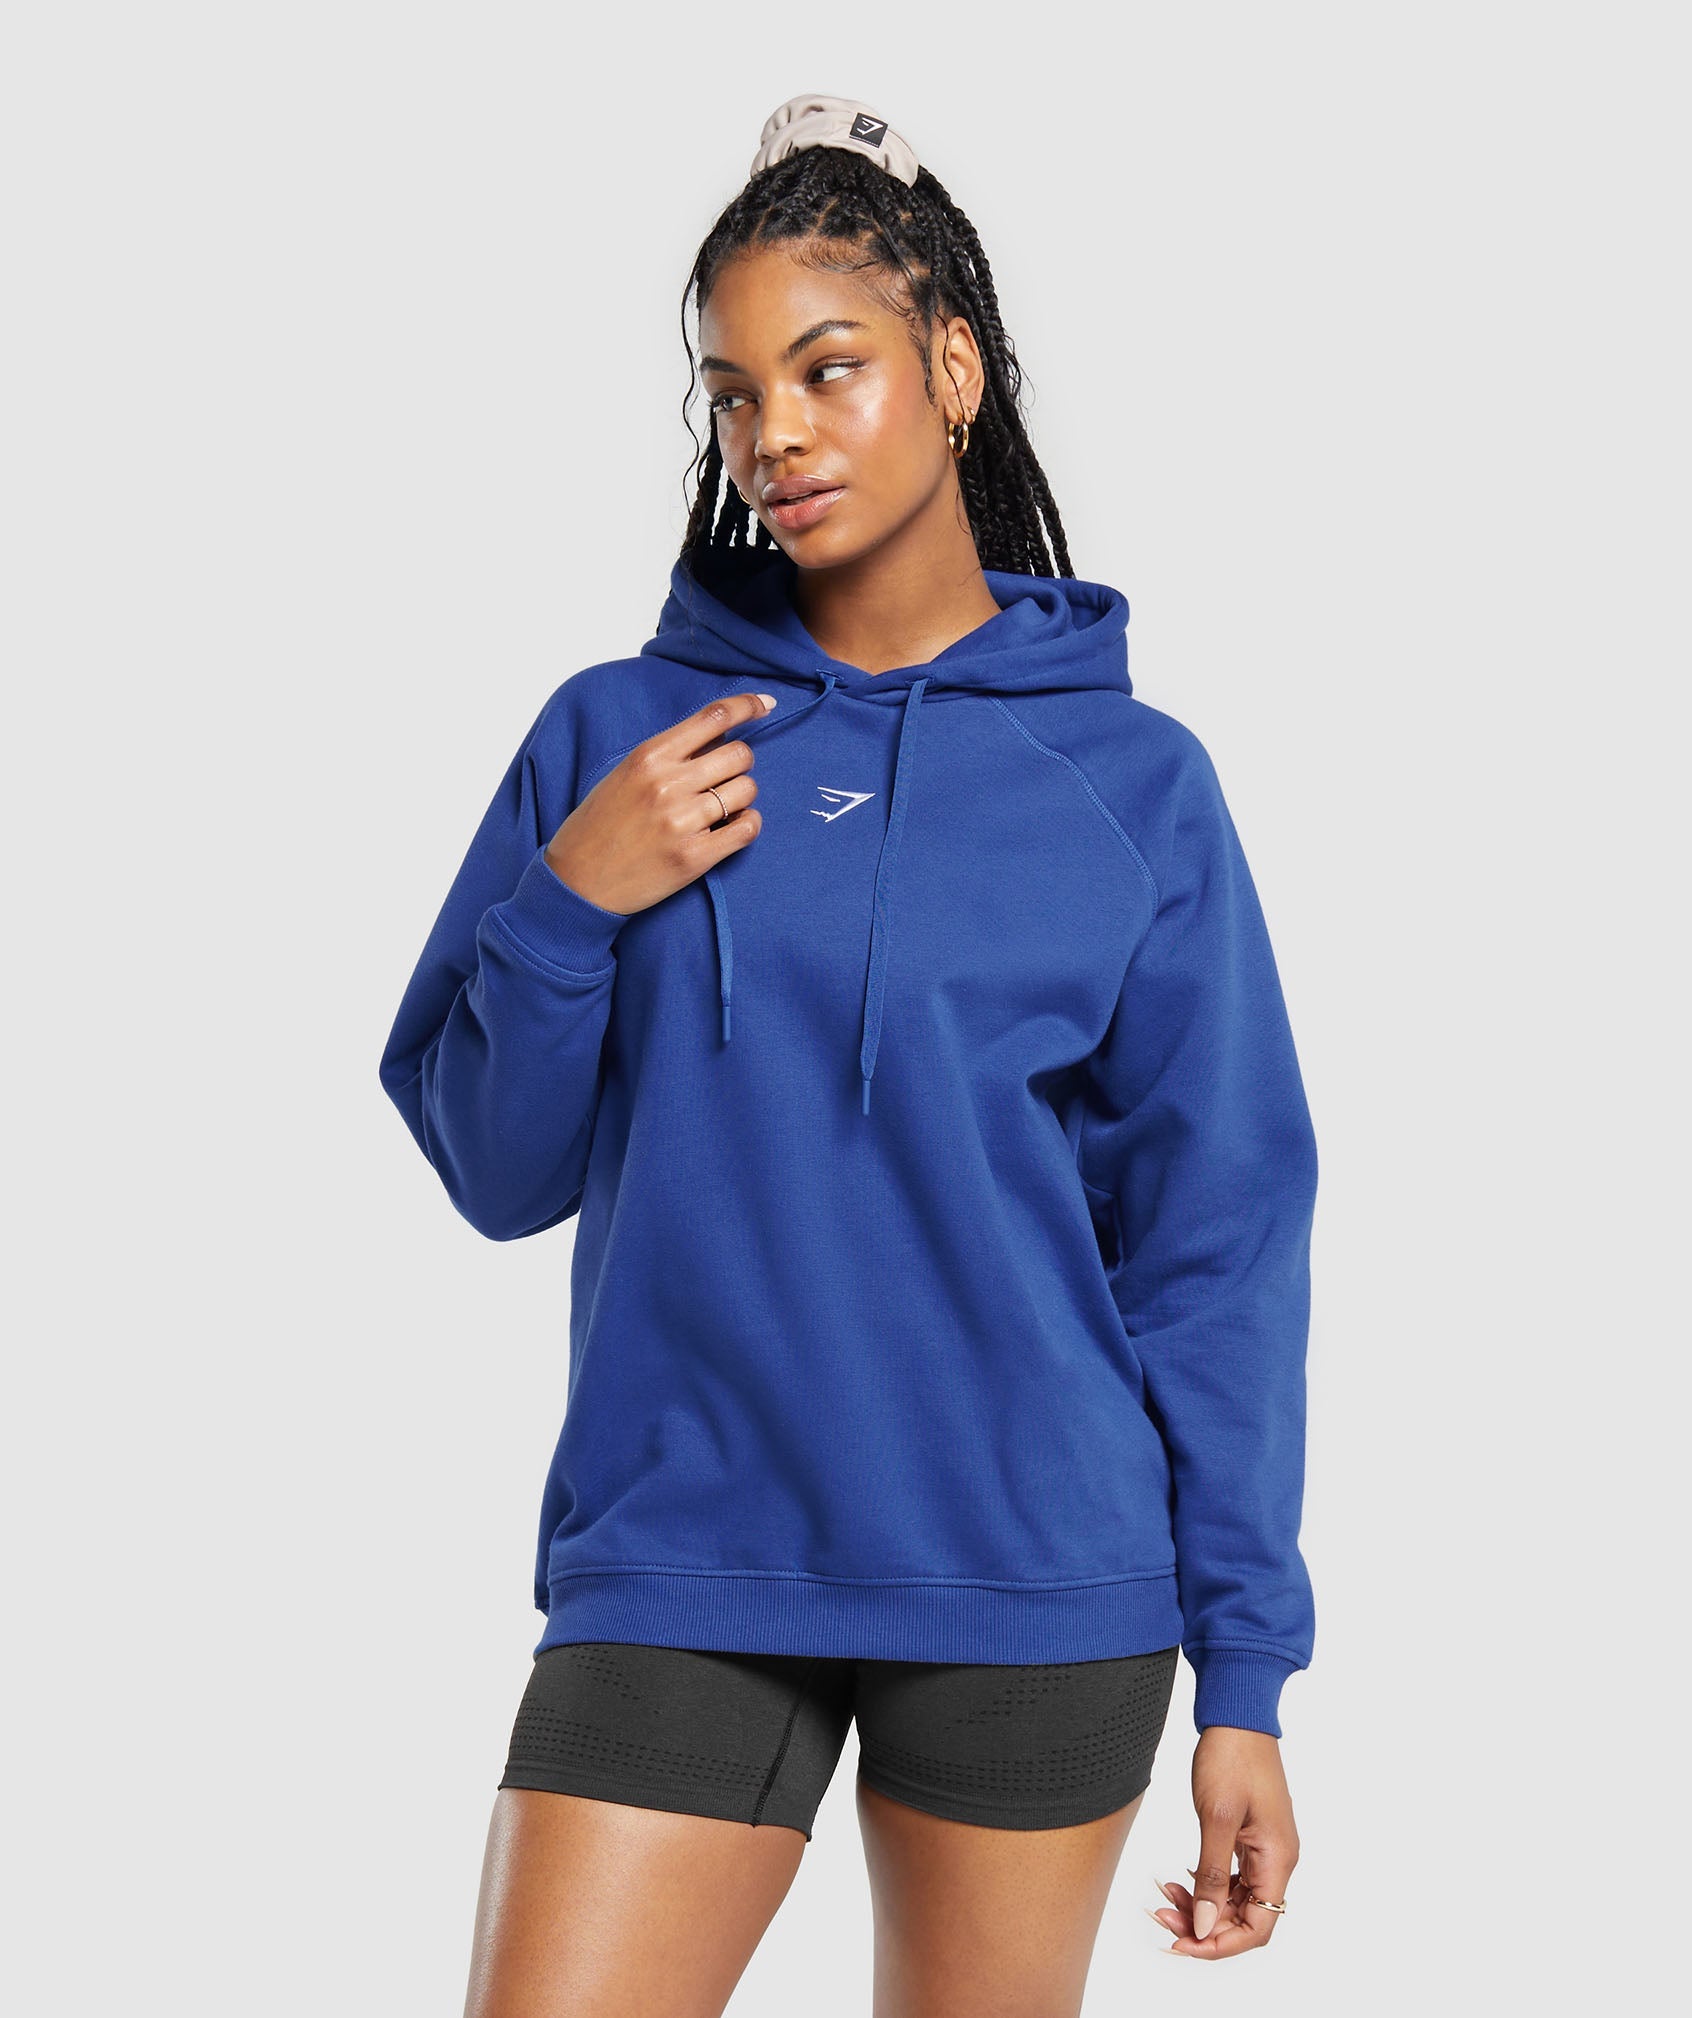 Training Oversized Fleece Hoodie in {{variantColor} is out of stock